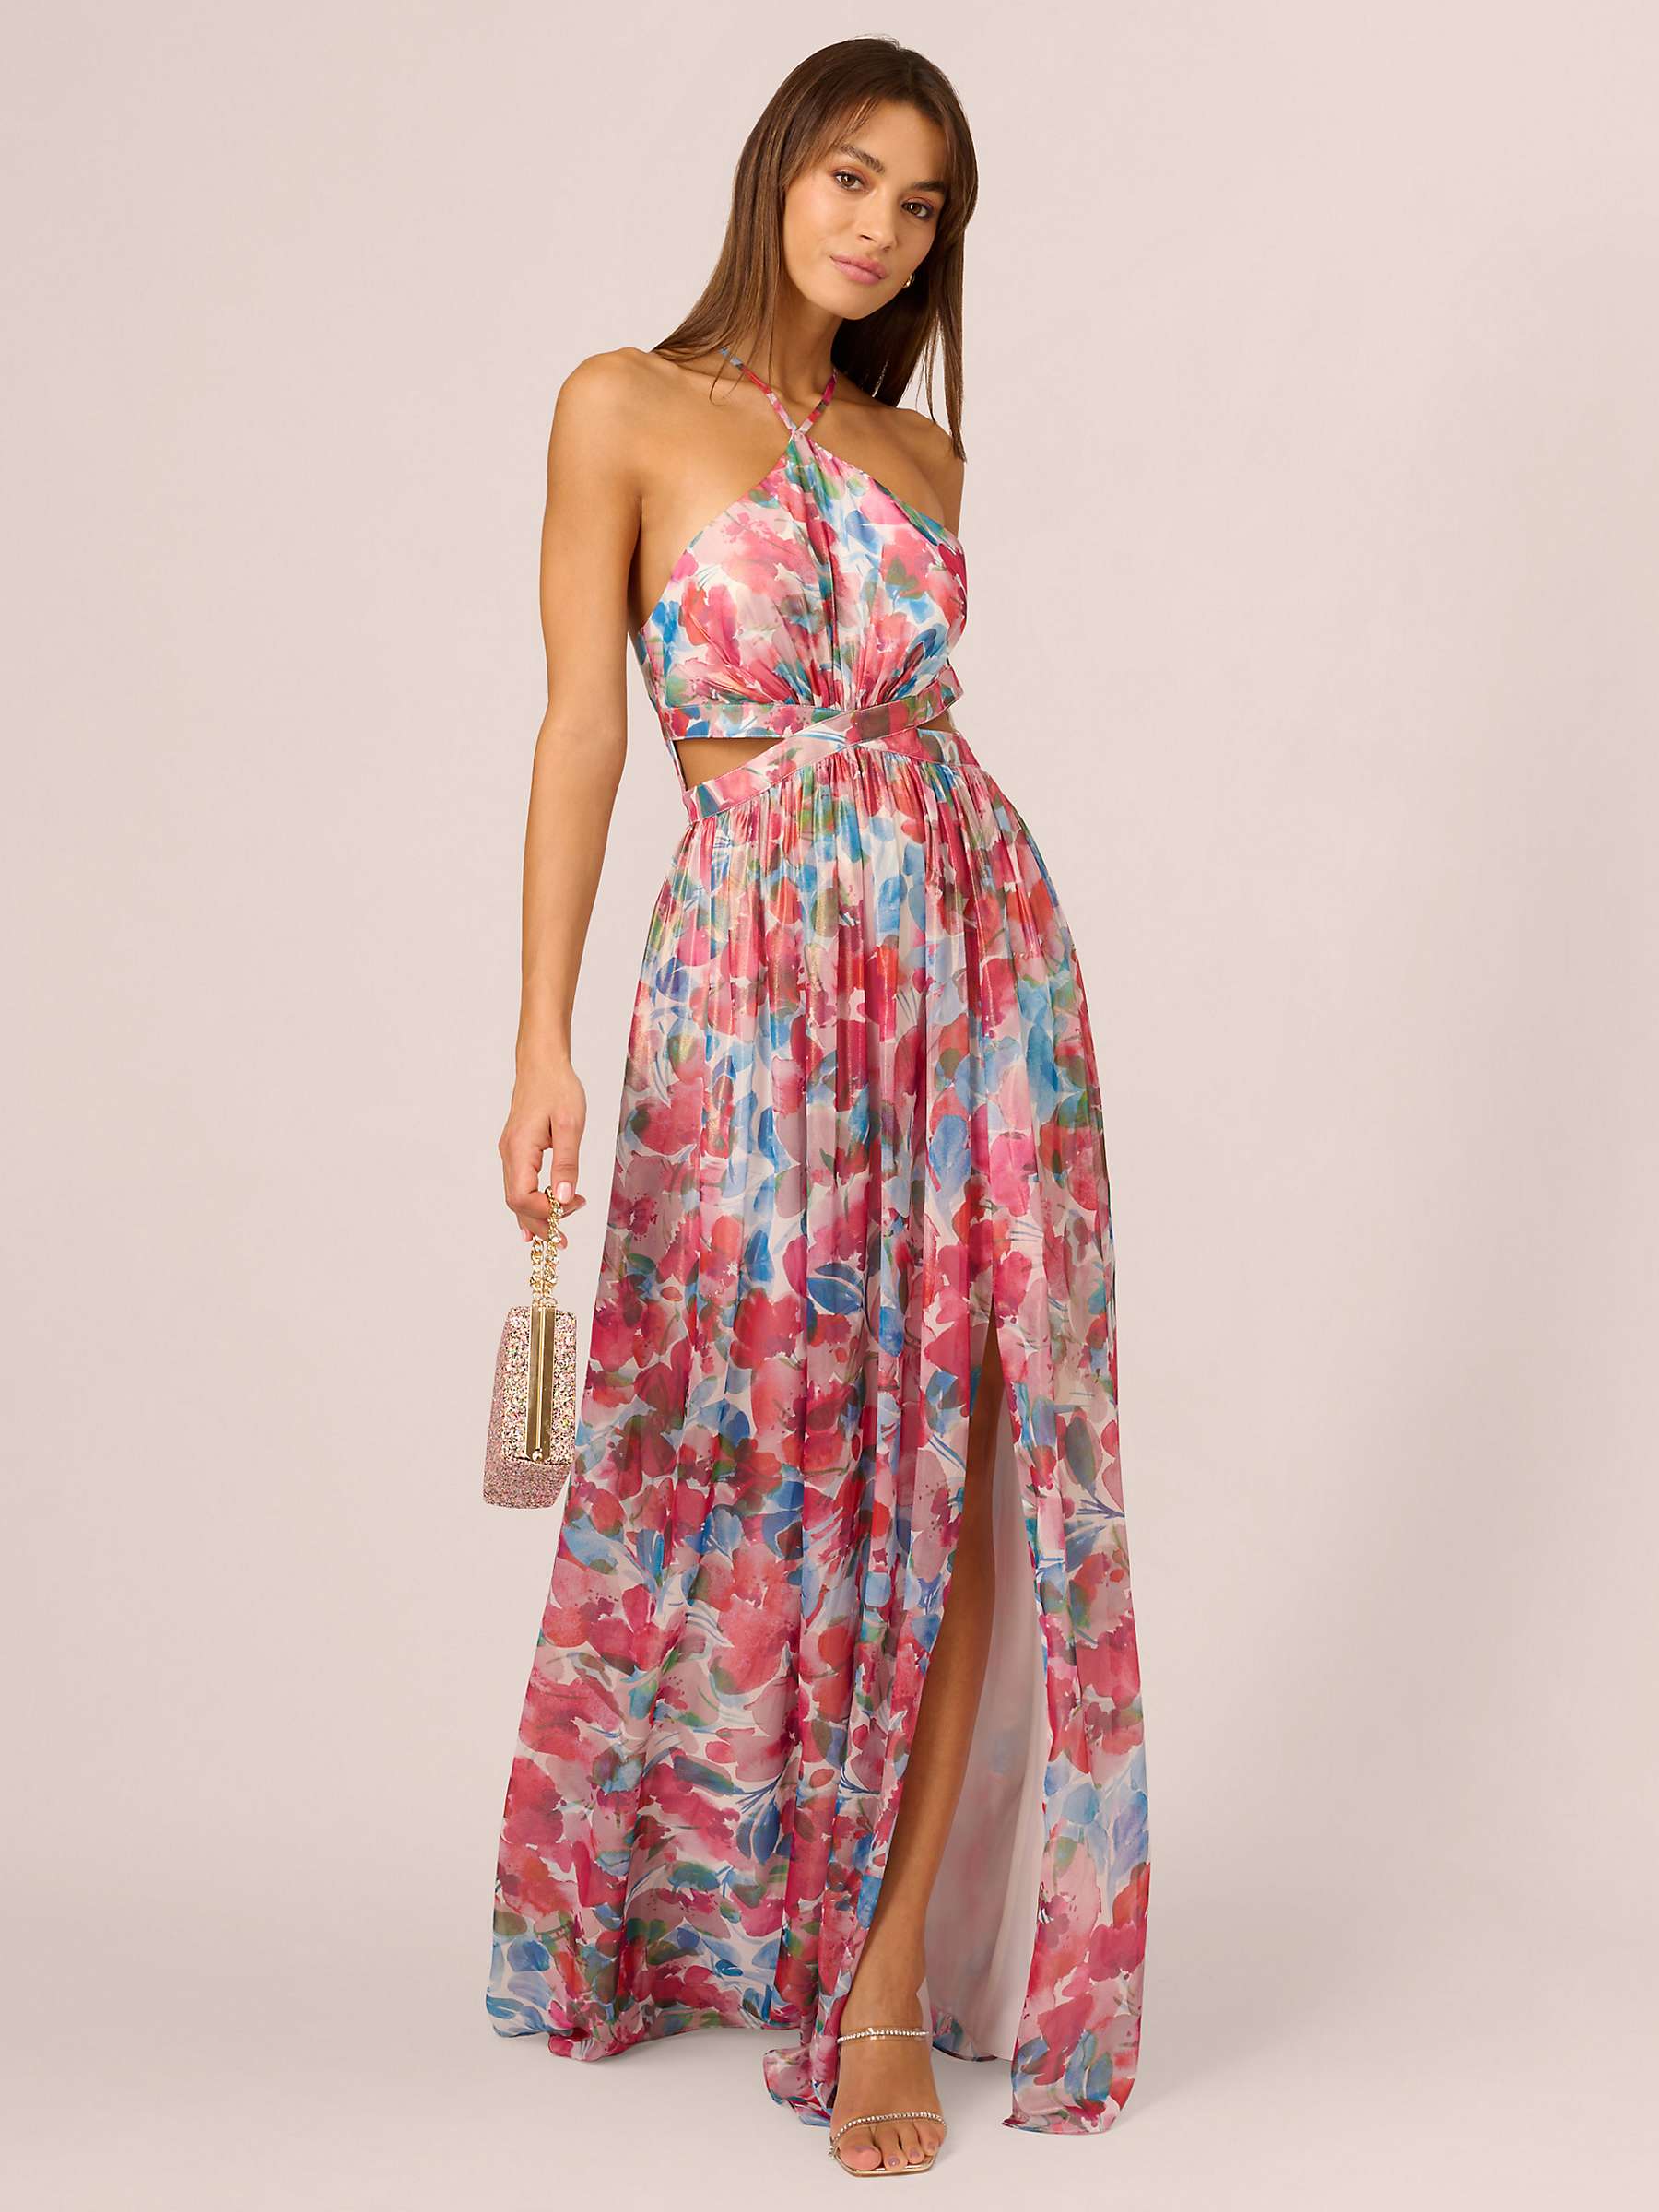 Buy Adrianna by Adrianna Papell Foiled Chiffon Maxi Dress, Pink/Multi Online at johnlewis.com